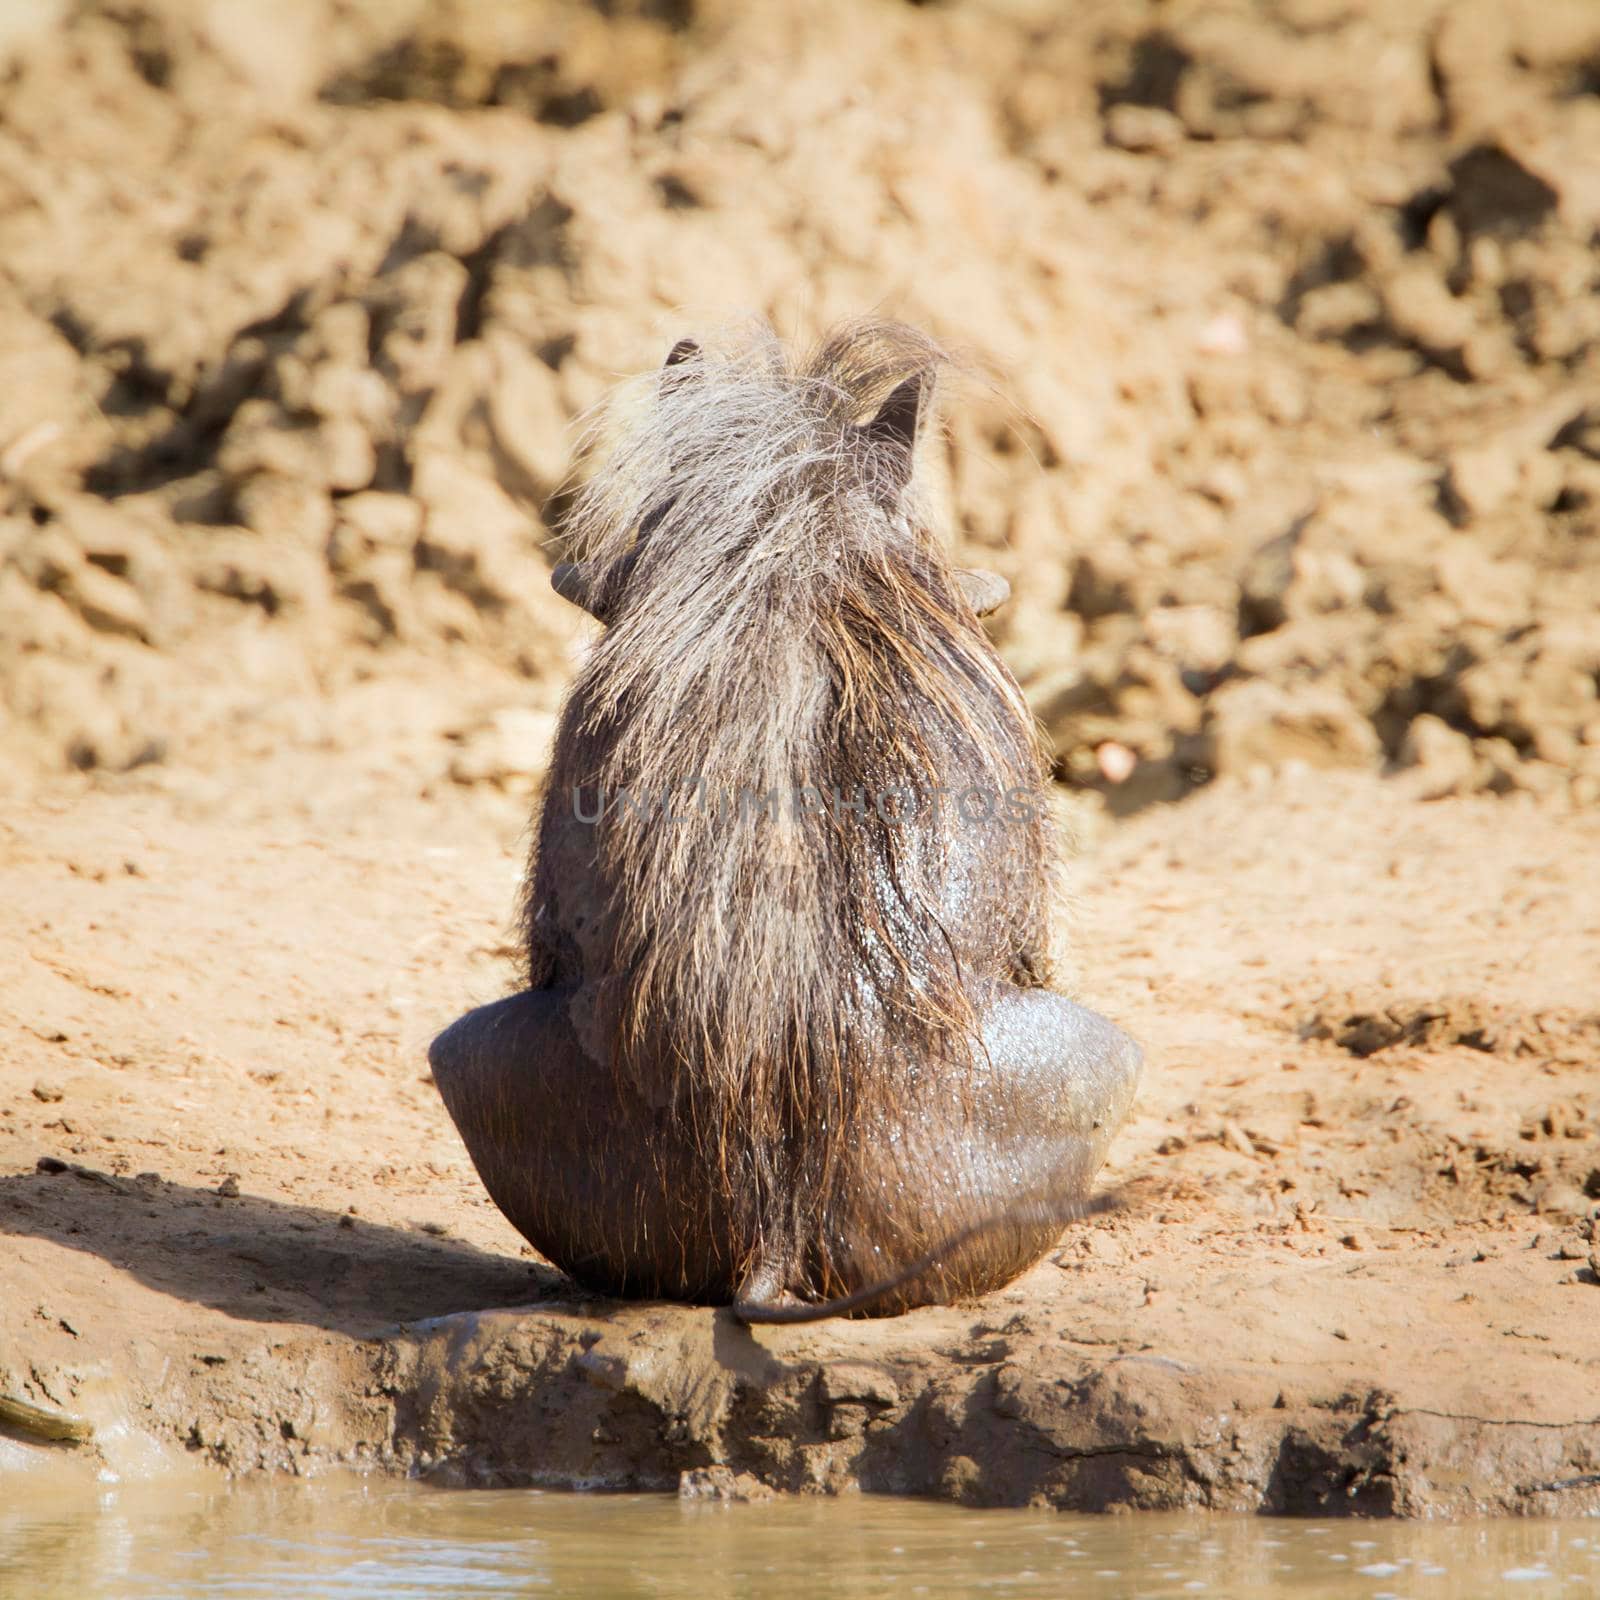 common warthog in Kruger National park by PACOCOMO